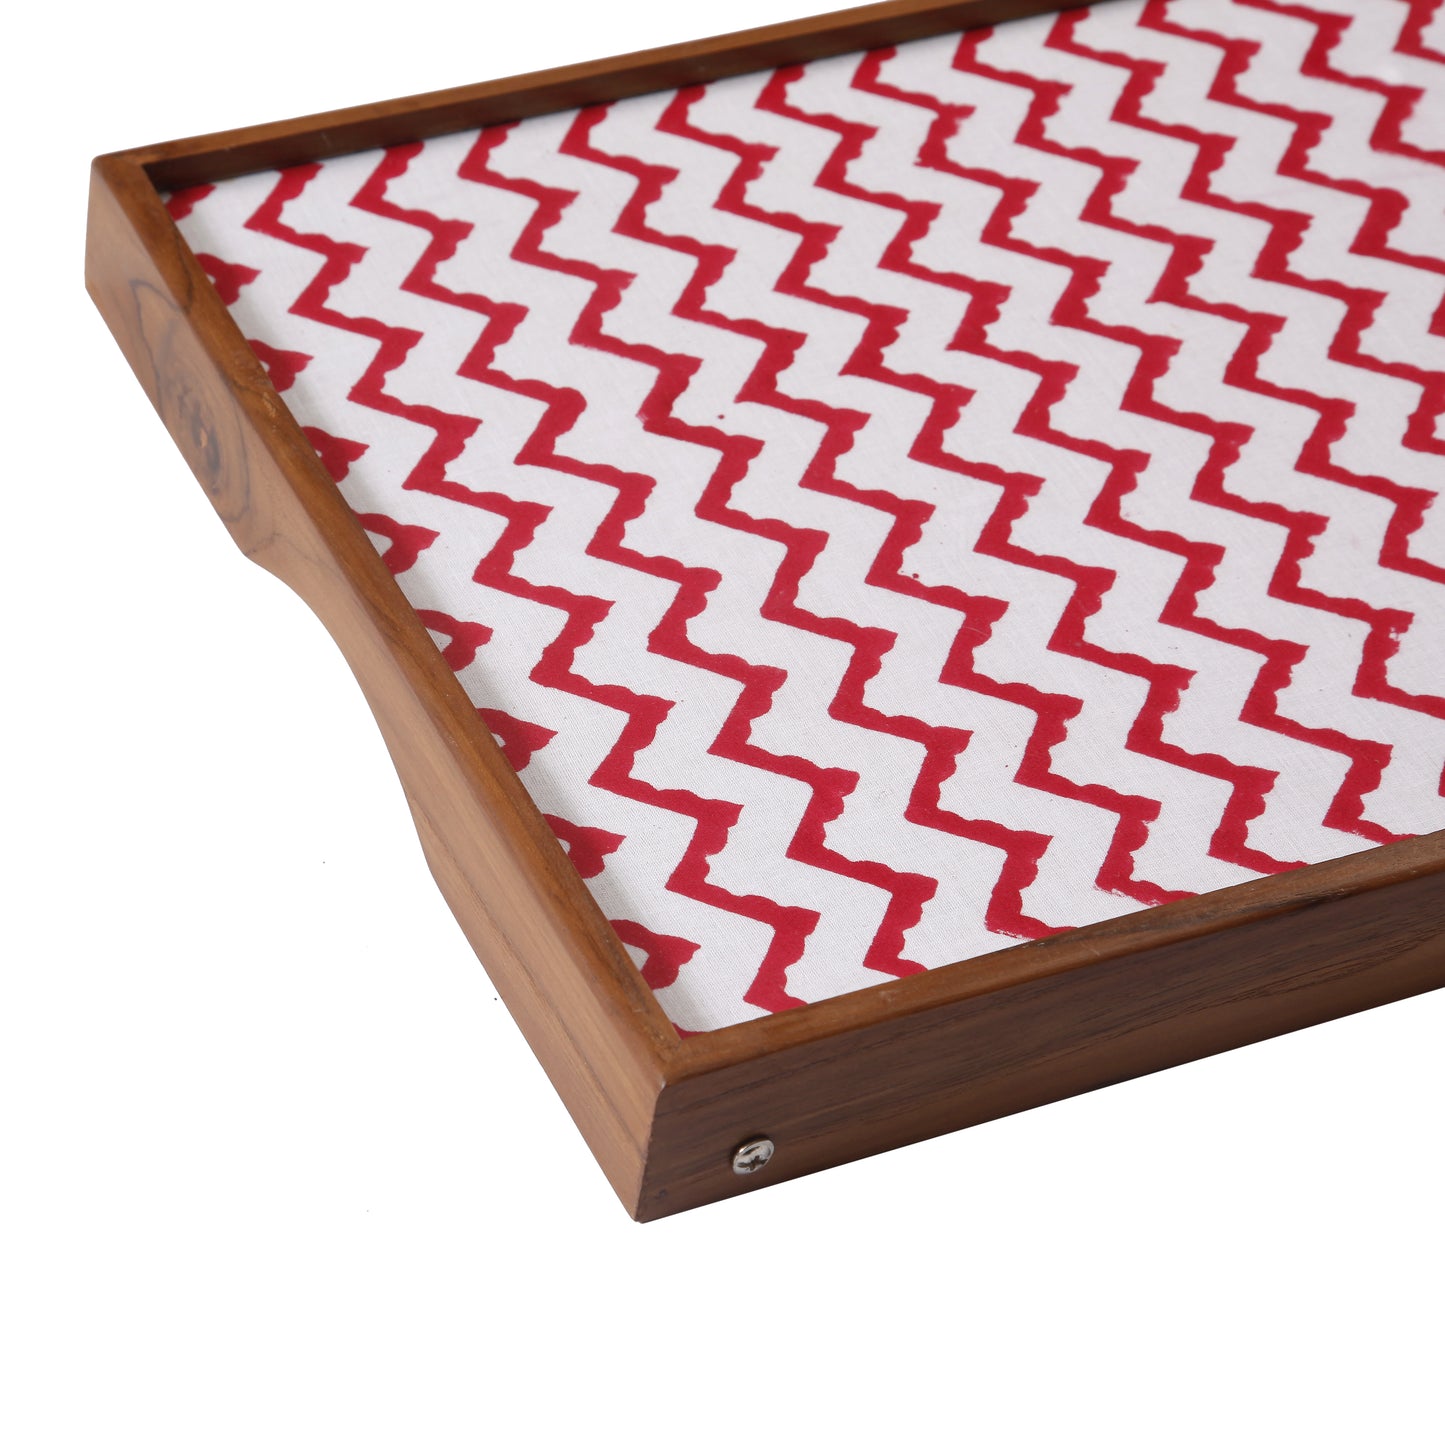 A Tiny Mistake Red Chevron Butler Tray, Laptop Desk, Breakfast Table